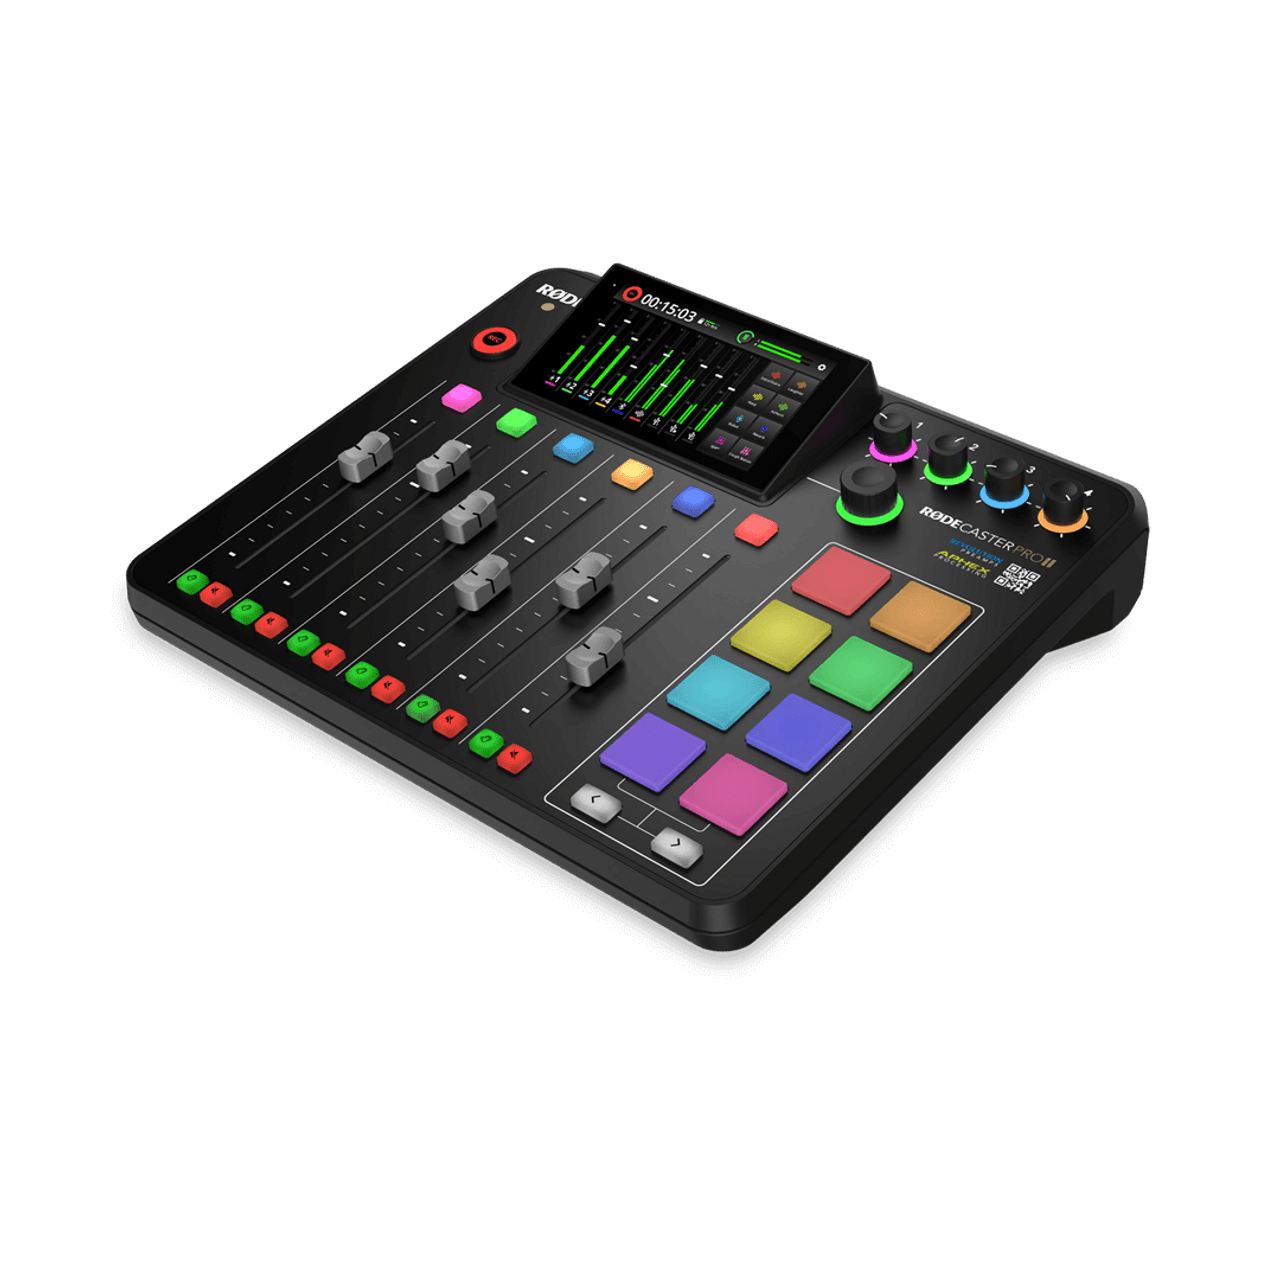 Rode Rodecaster Pro II Podcast Production Console Reviews